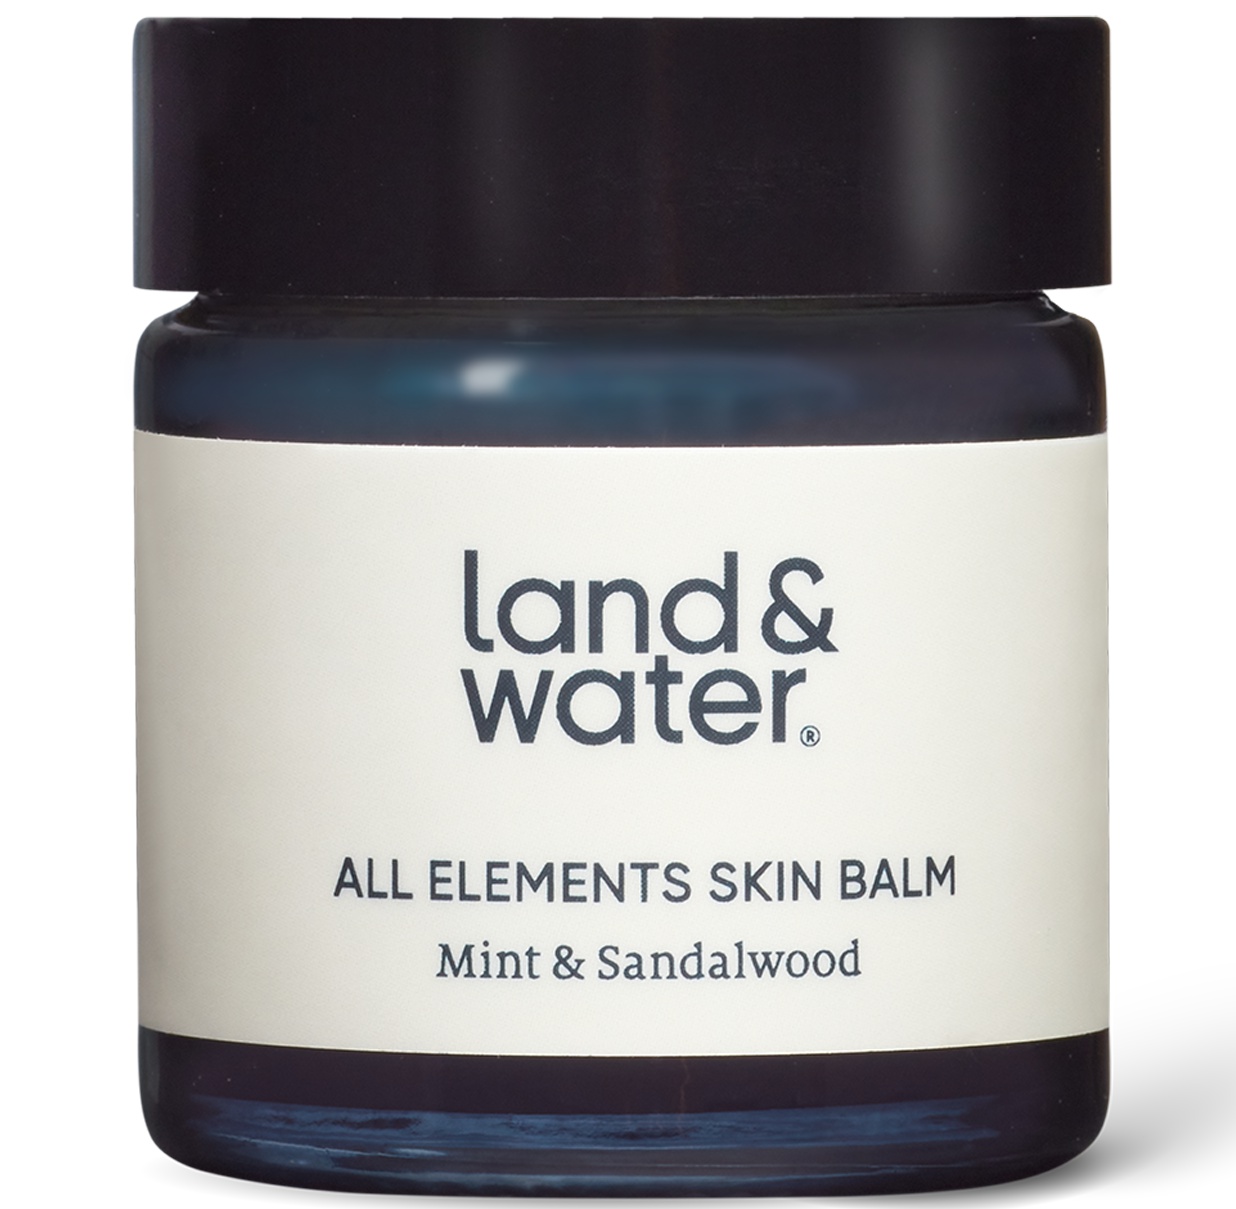 Land & Water All Elements Skin Balm